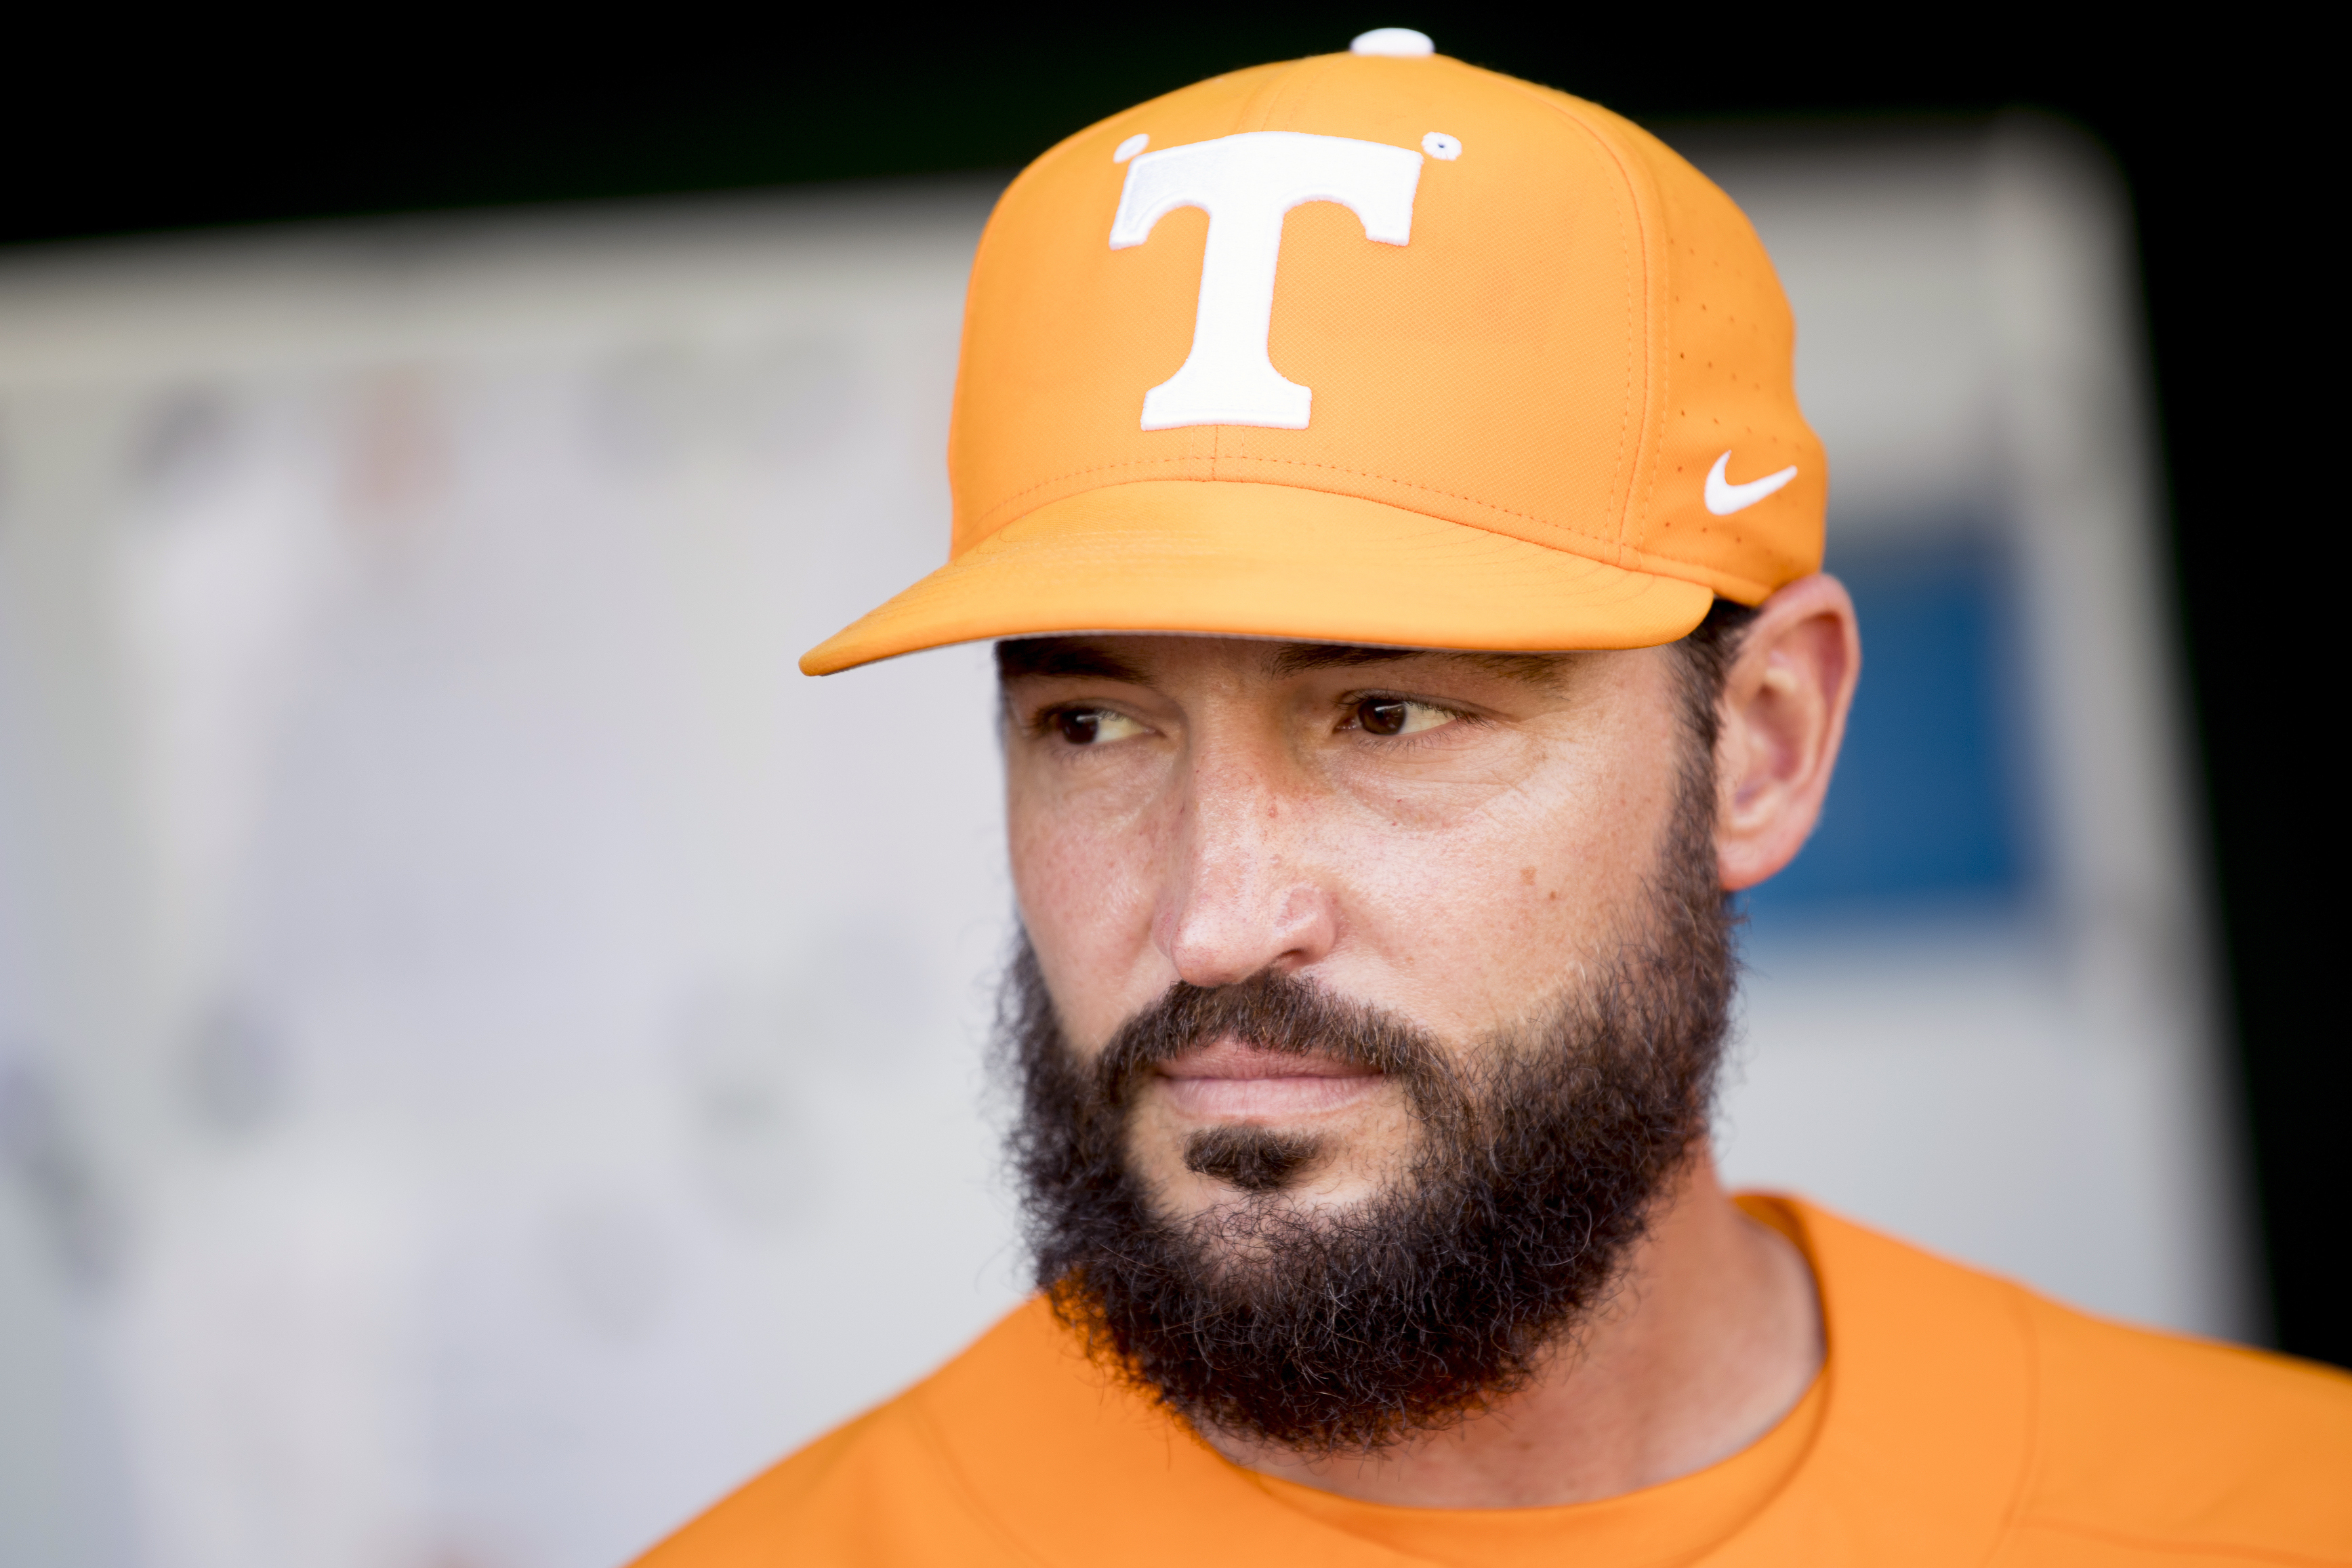 Tony Vitello to return to Tennessee baseball after serving